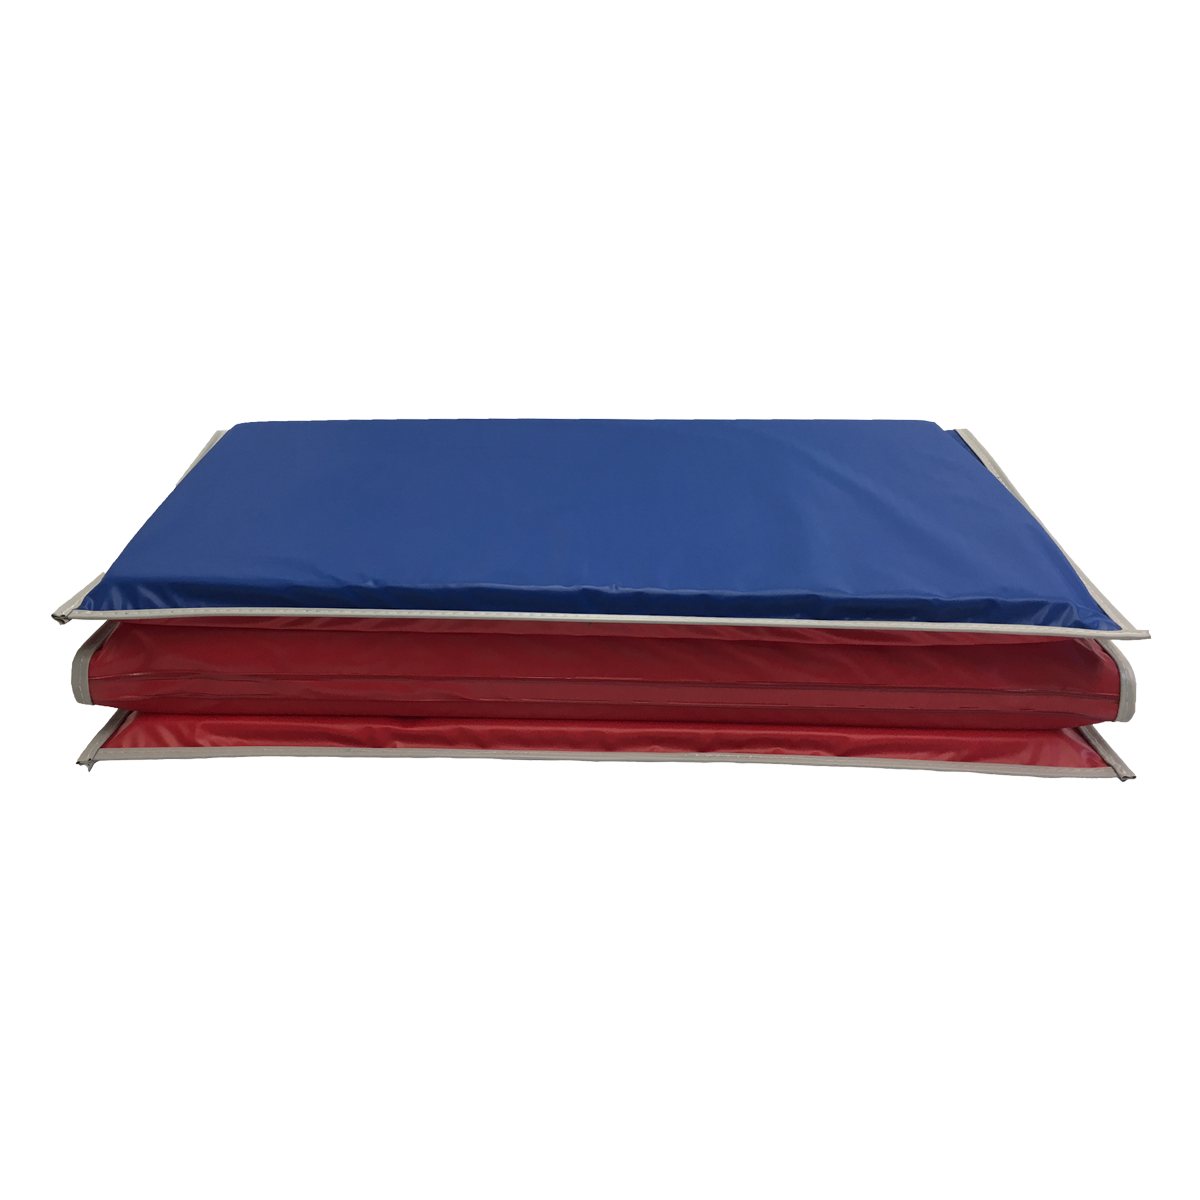 12 PACK OF 1" BASIC KINDERMATS WITH BINDING